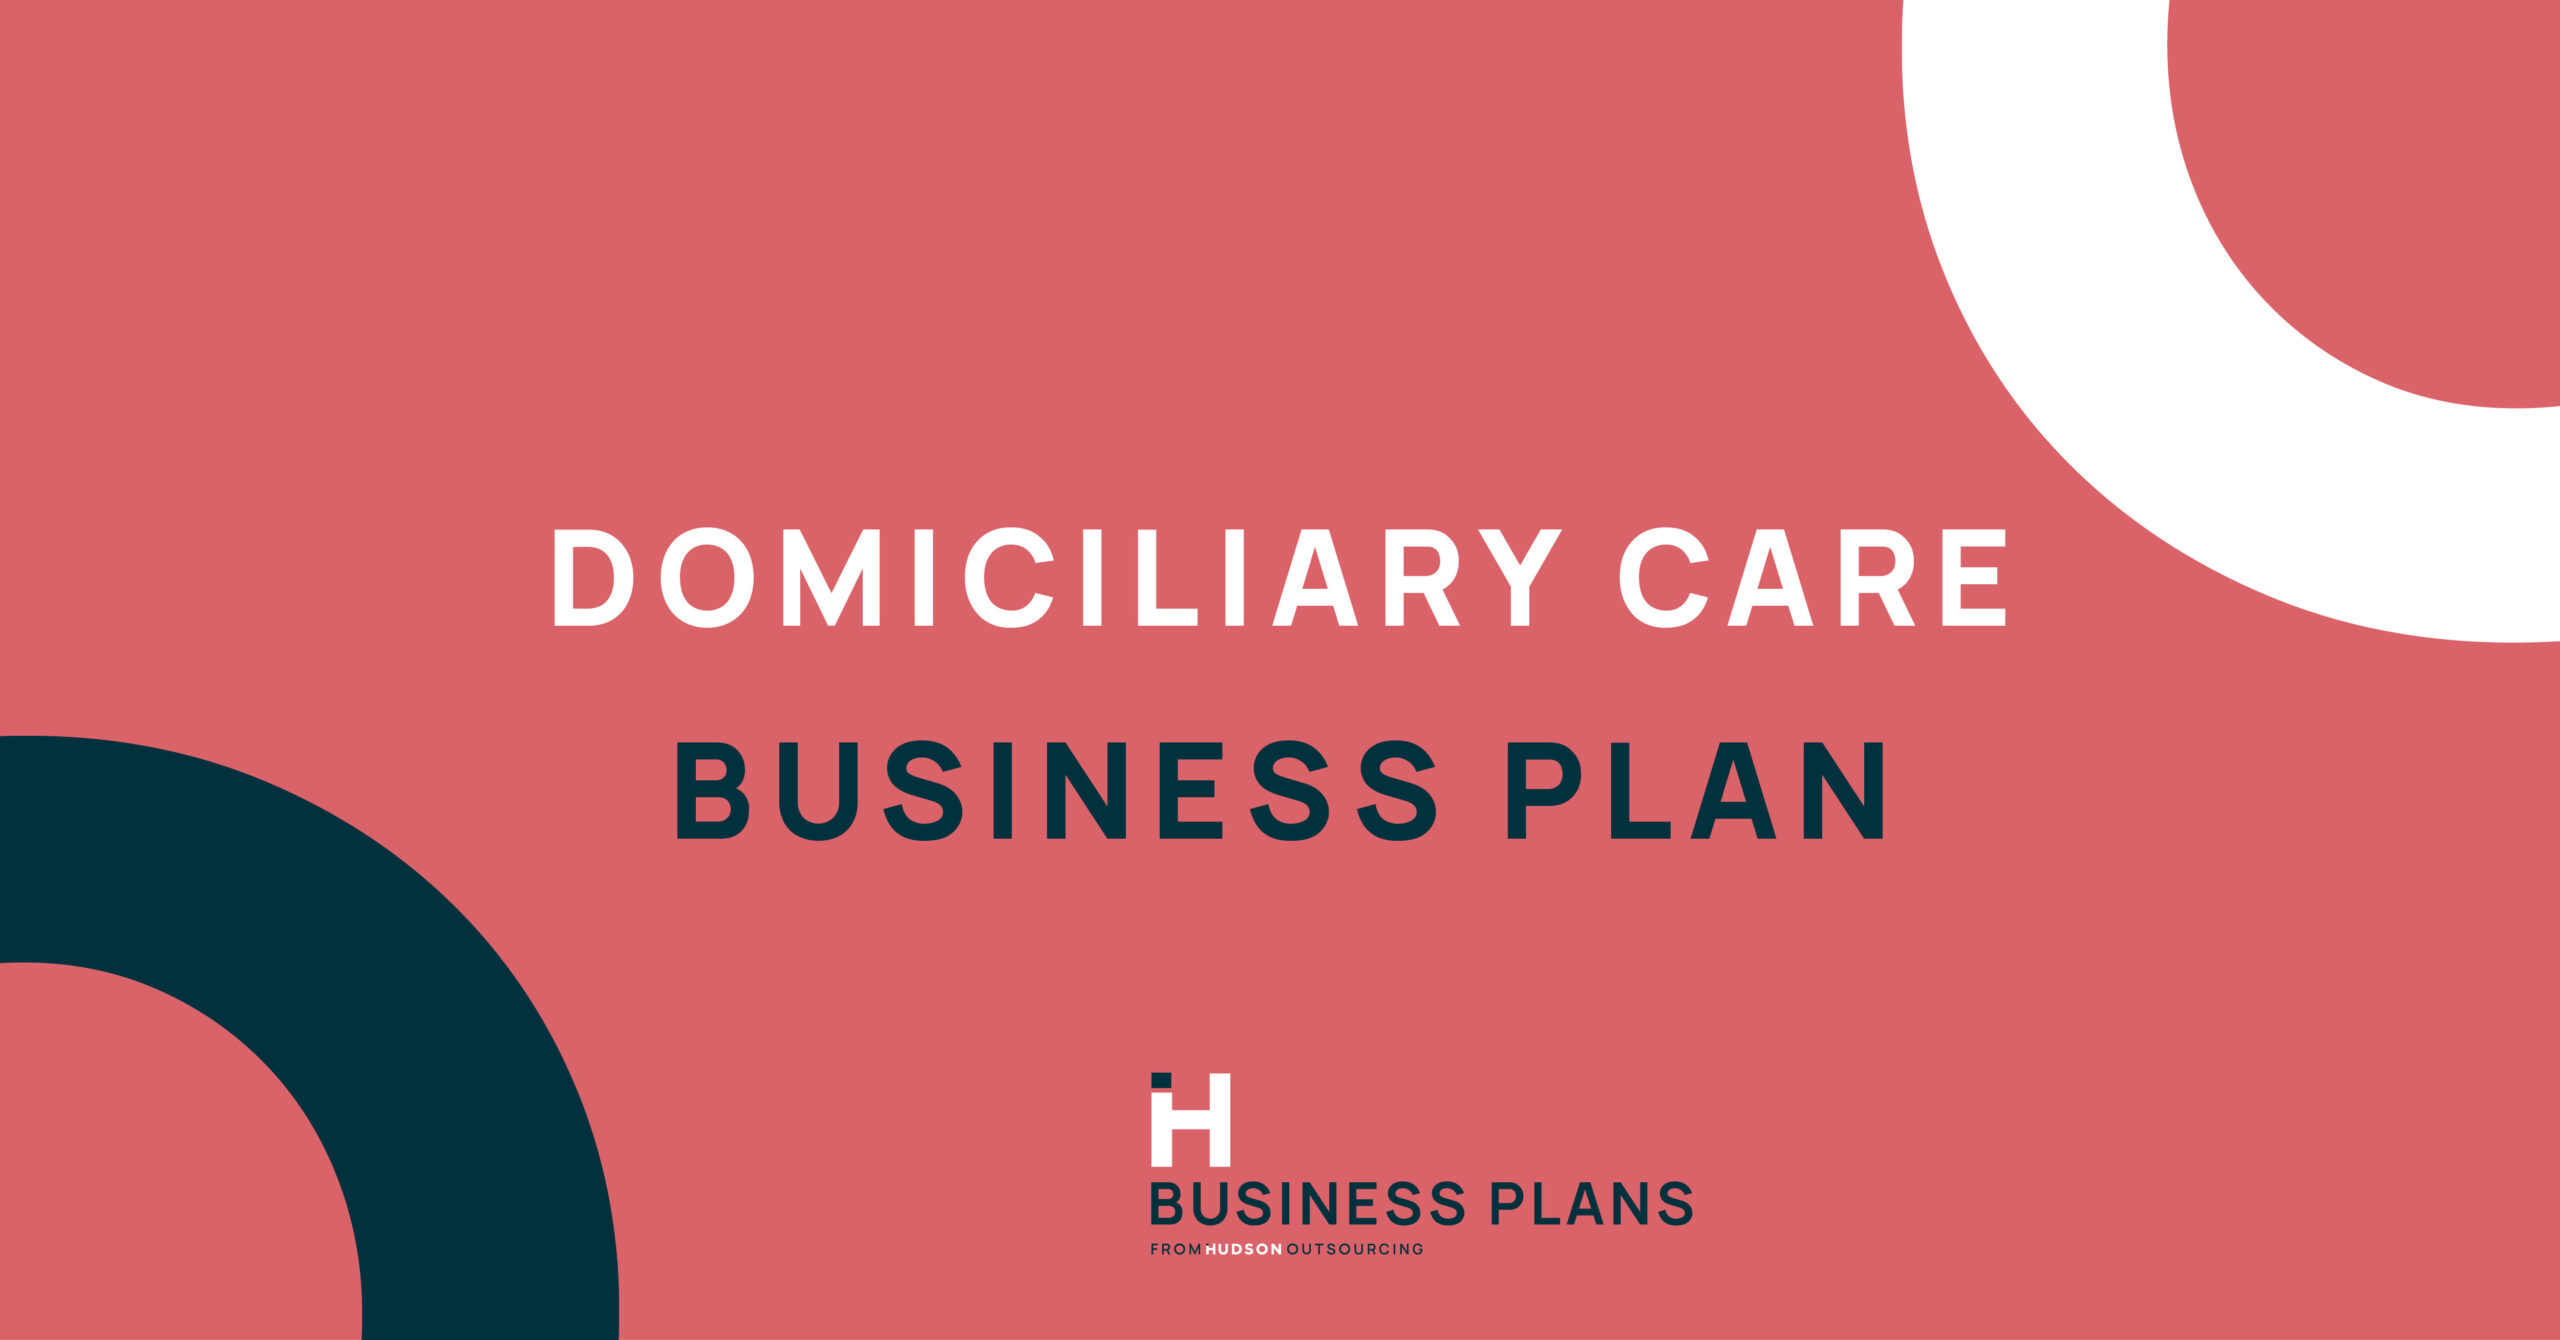 care agency business plan examples uk